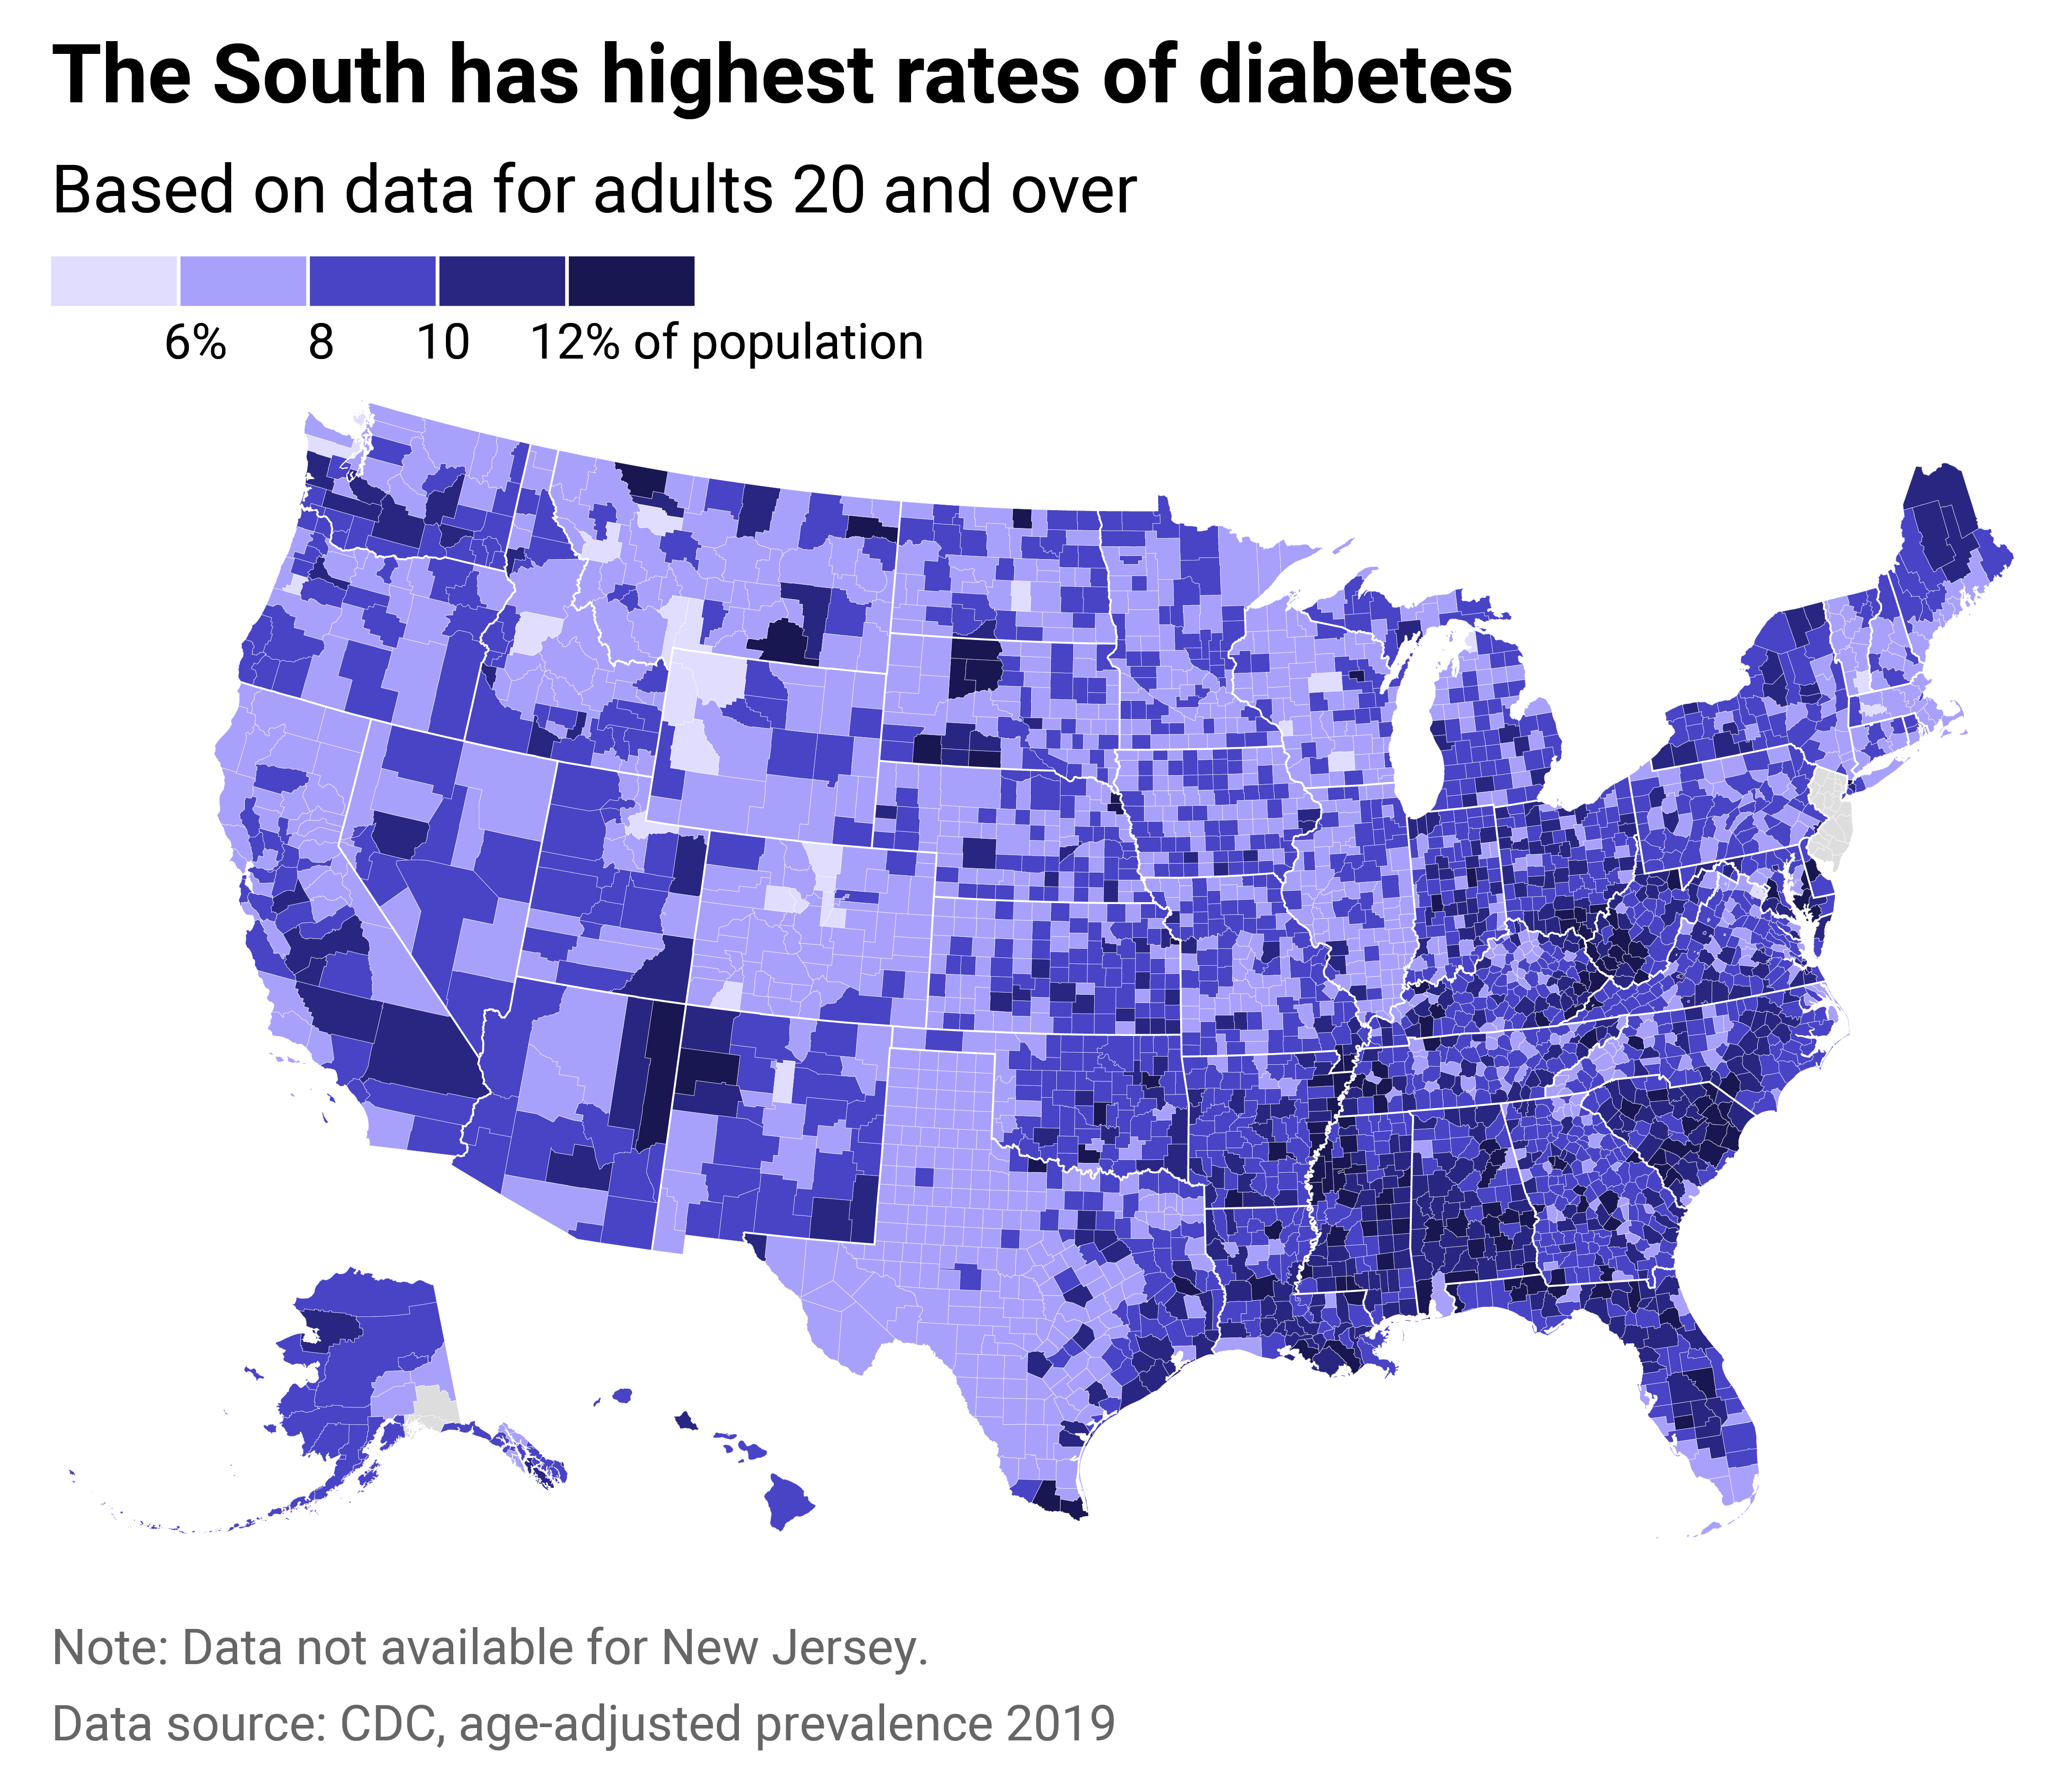 County map showing Southern U.S., especially South Carolina, Mississippi, and Alabama have the highest prevalence of diabetes.